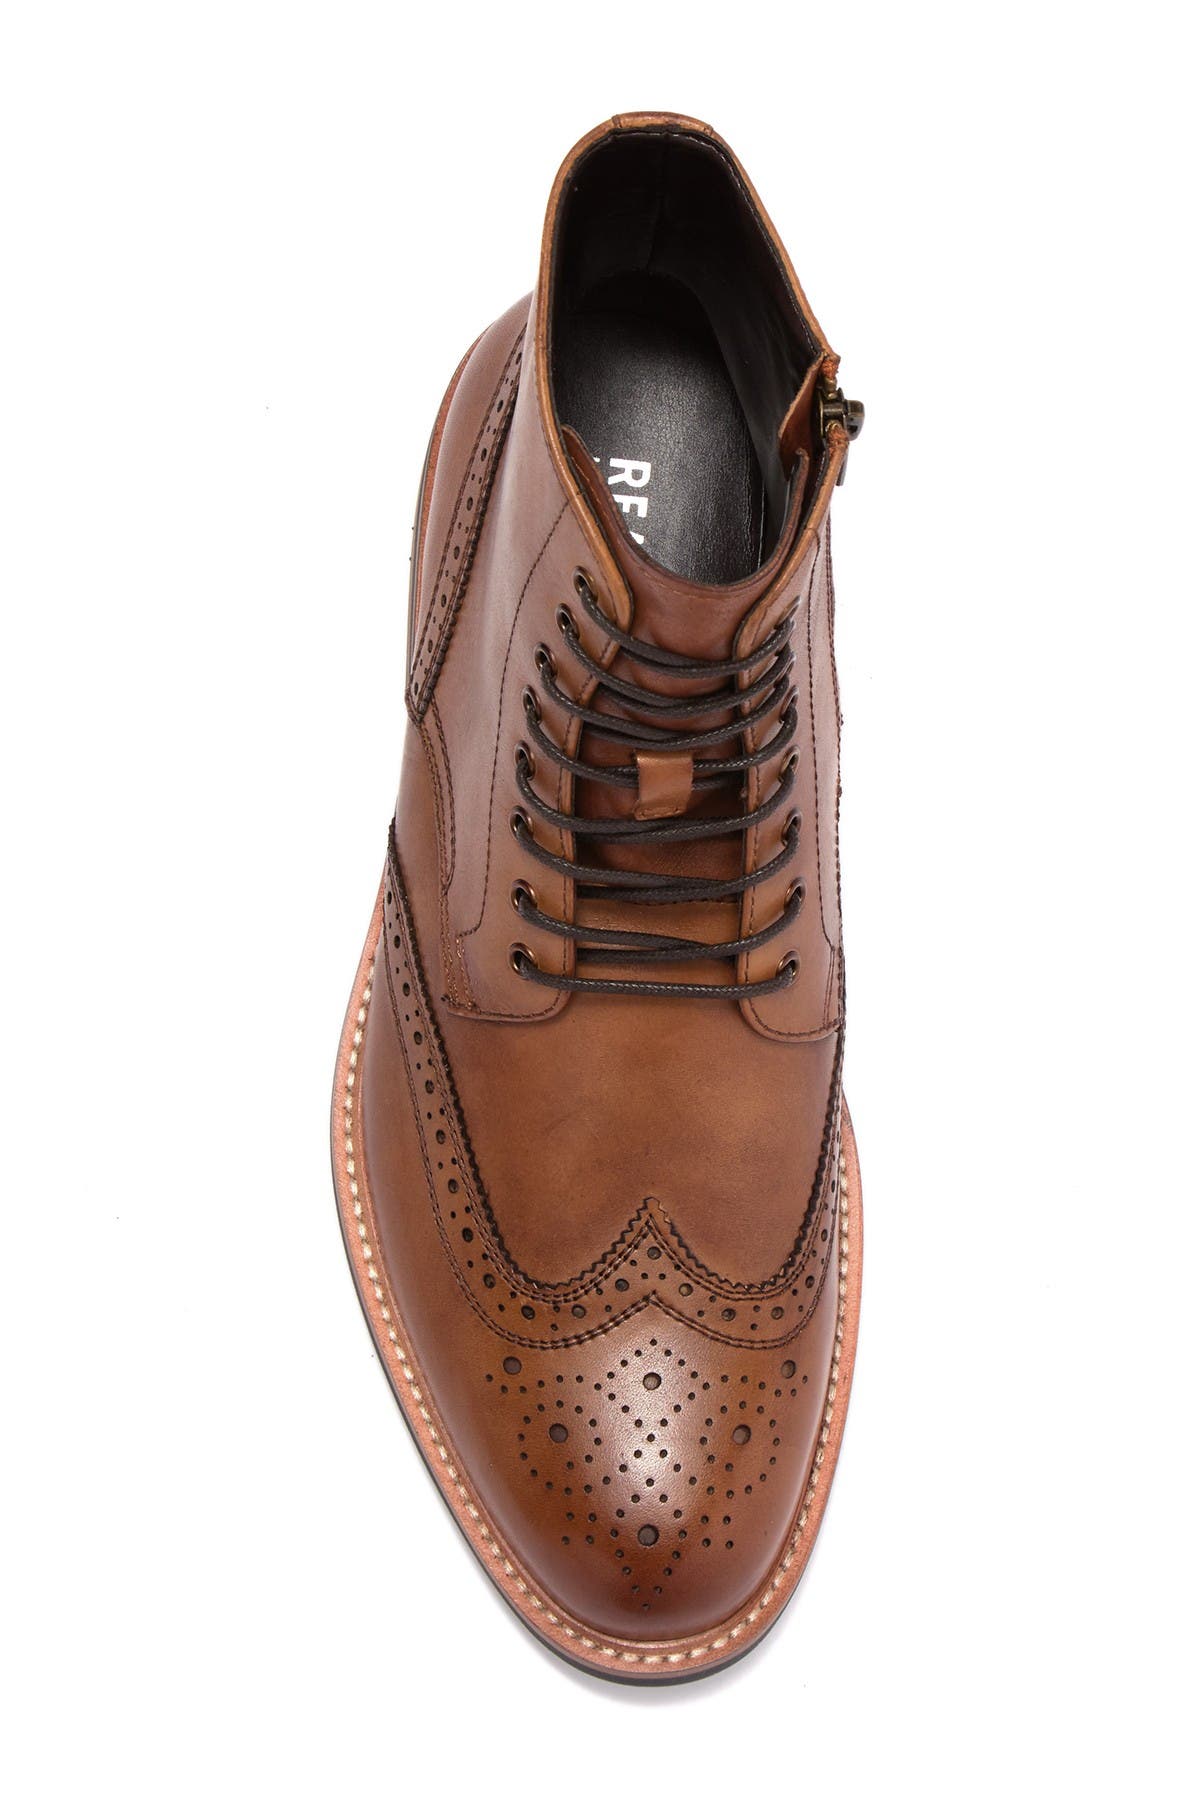 kenneth cole reaction design wingtip boot